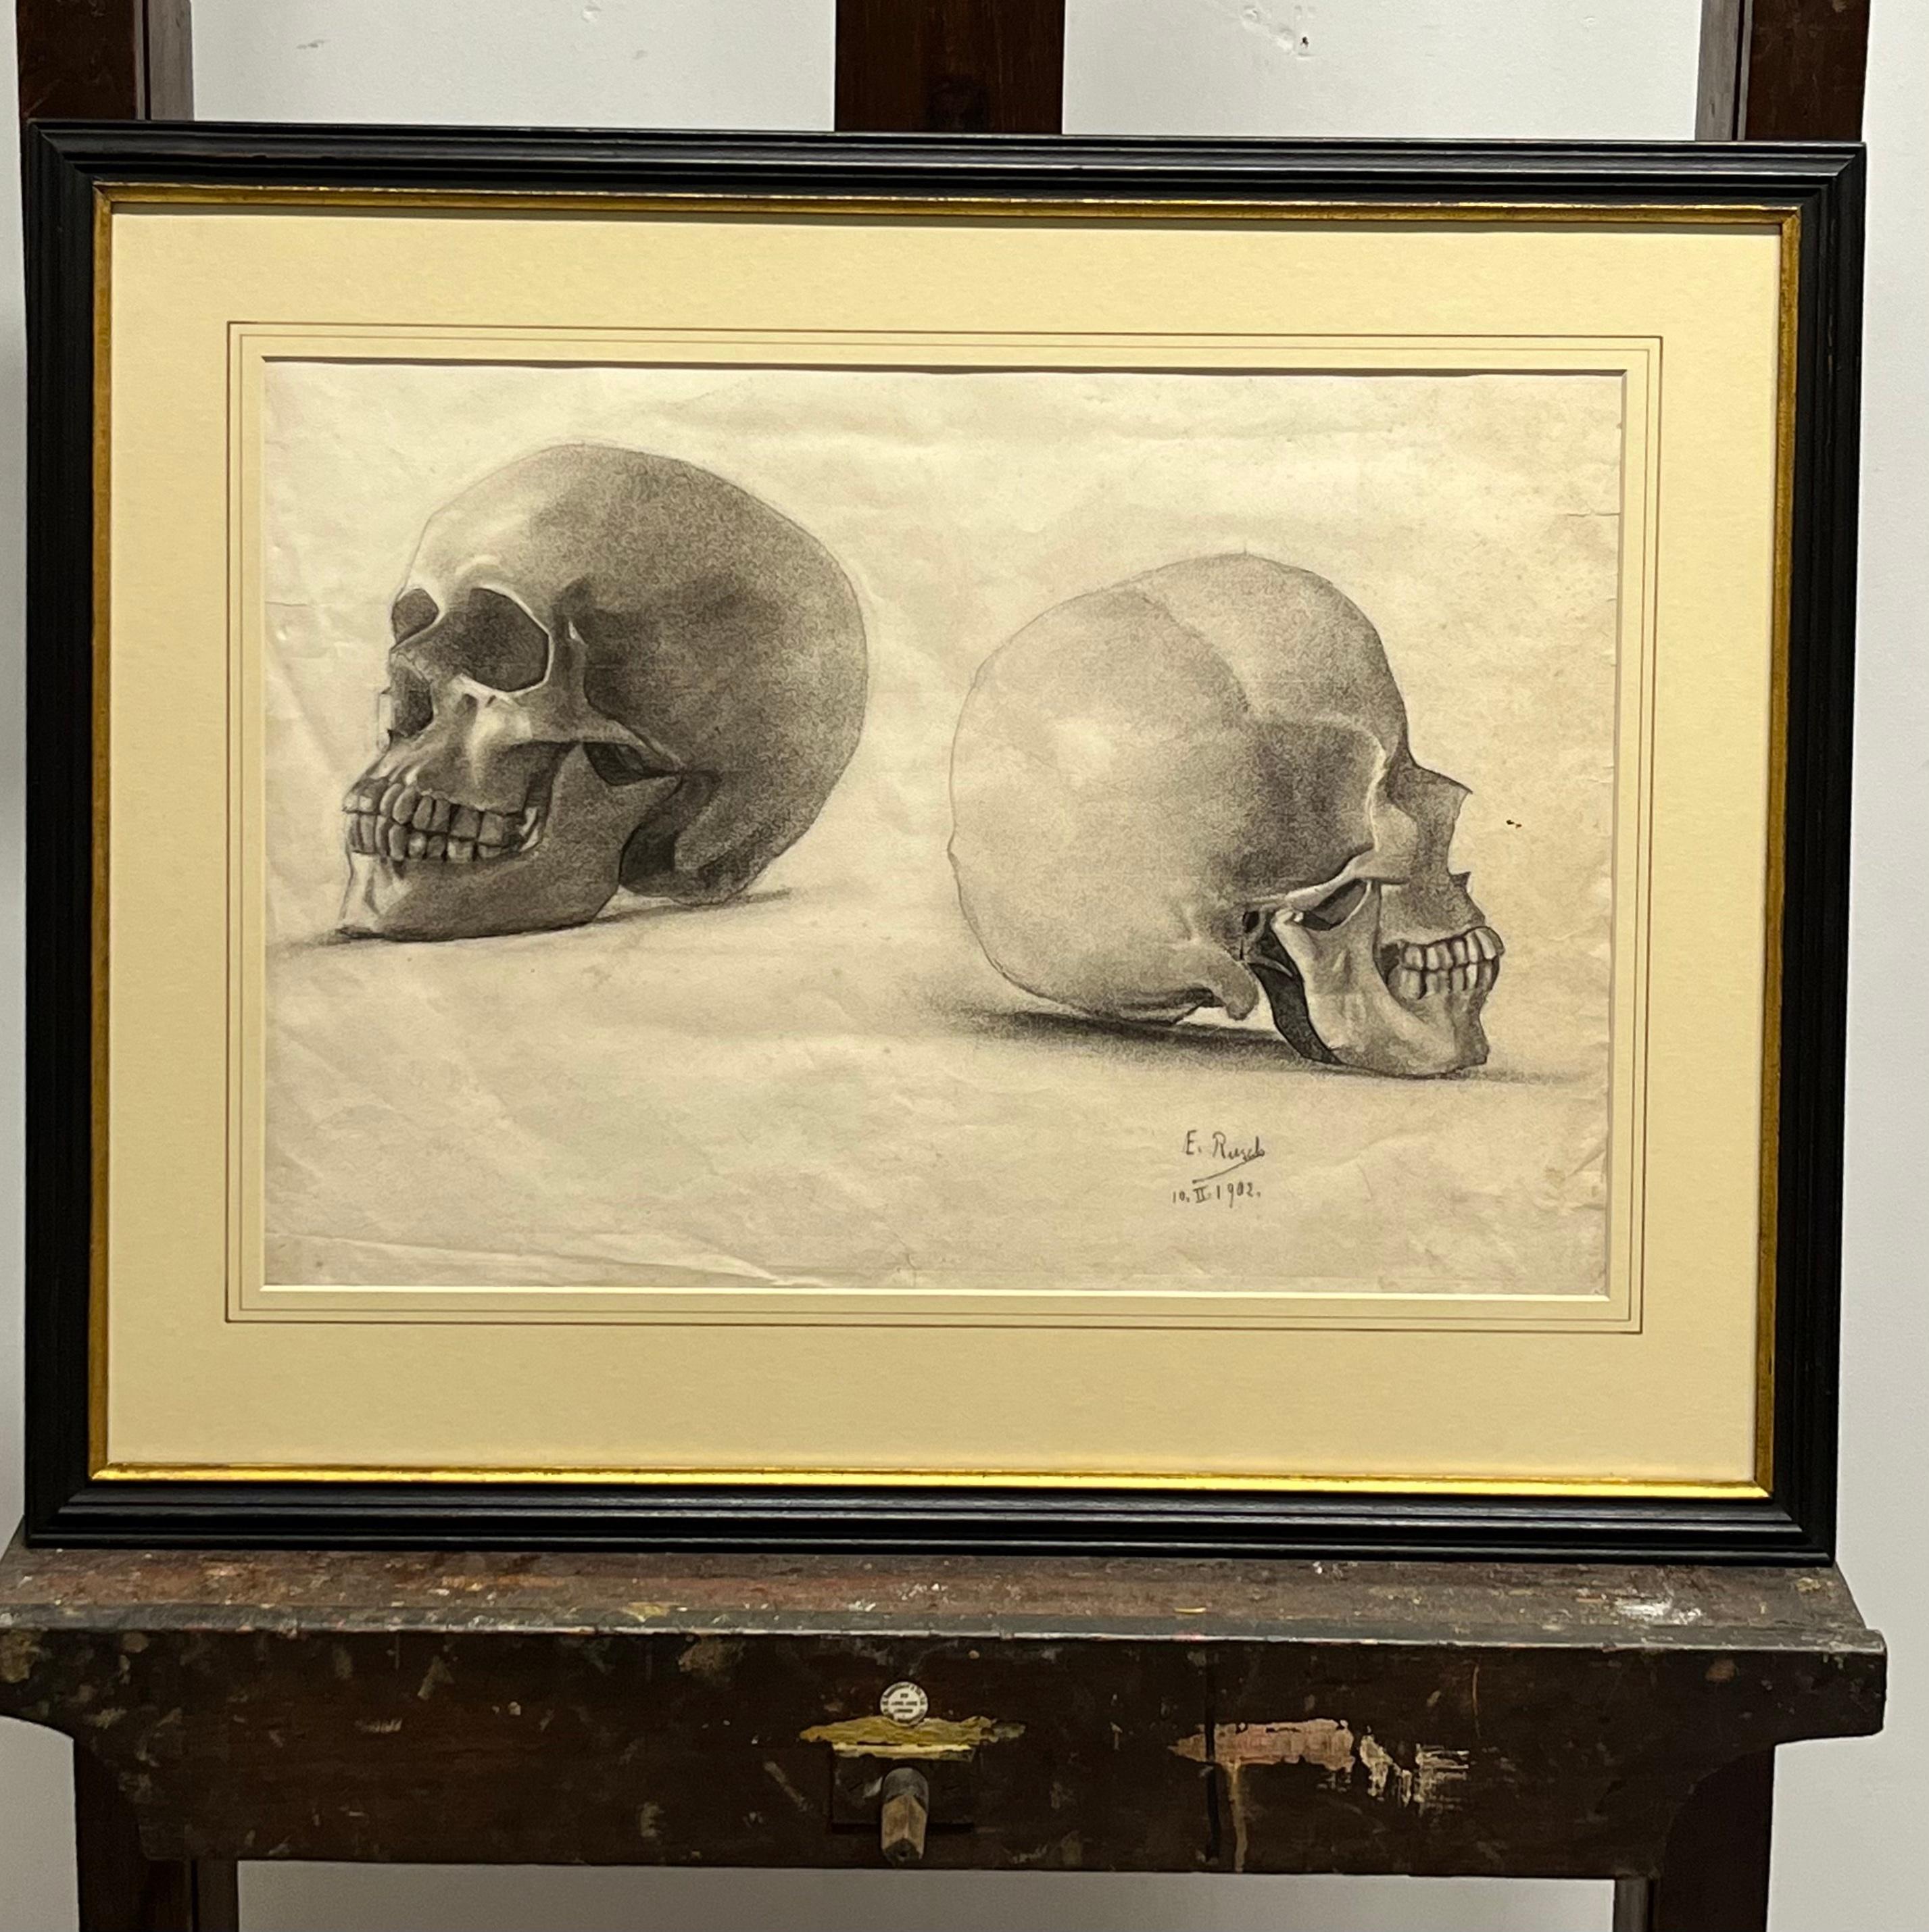 Memento mori - A study of a Skull in two positions - Art by E. Rusch